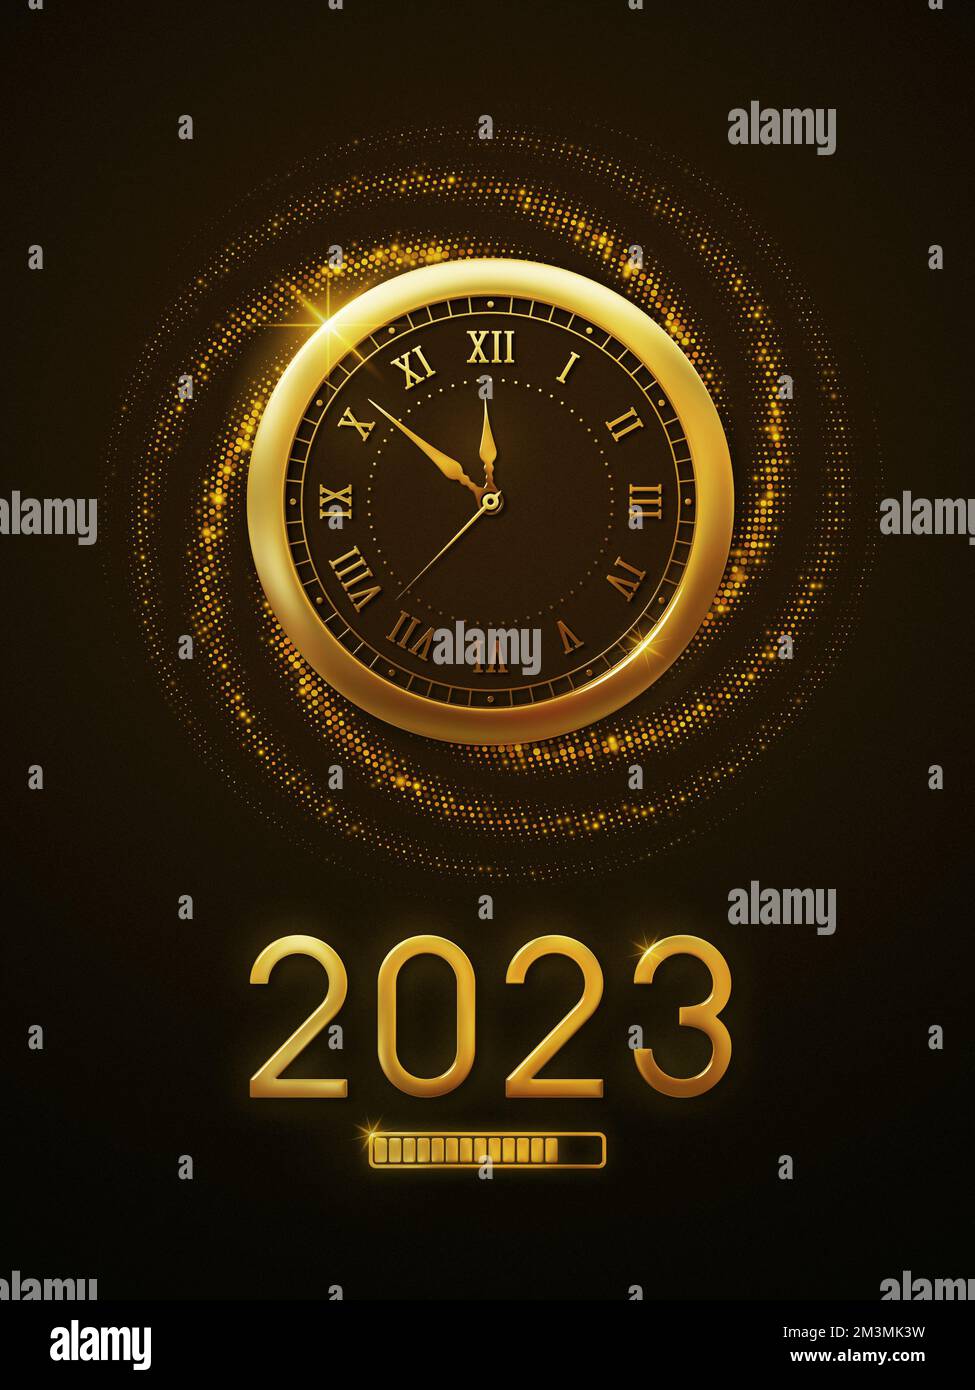 https://c8.alamy.com/comp/2M3MK3W/new-year-2023-countdown-clock-shows-the-new-year-2023-loading-with-a-metallic-gold-watch-and-glitter-last-seconds-of-year-2023-2M3MK3W.jpg